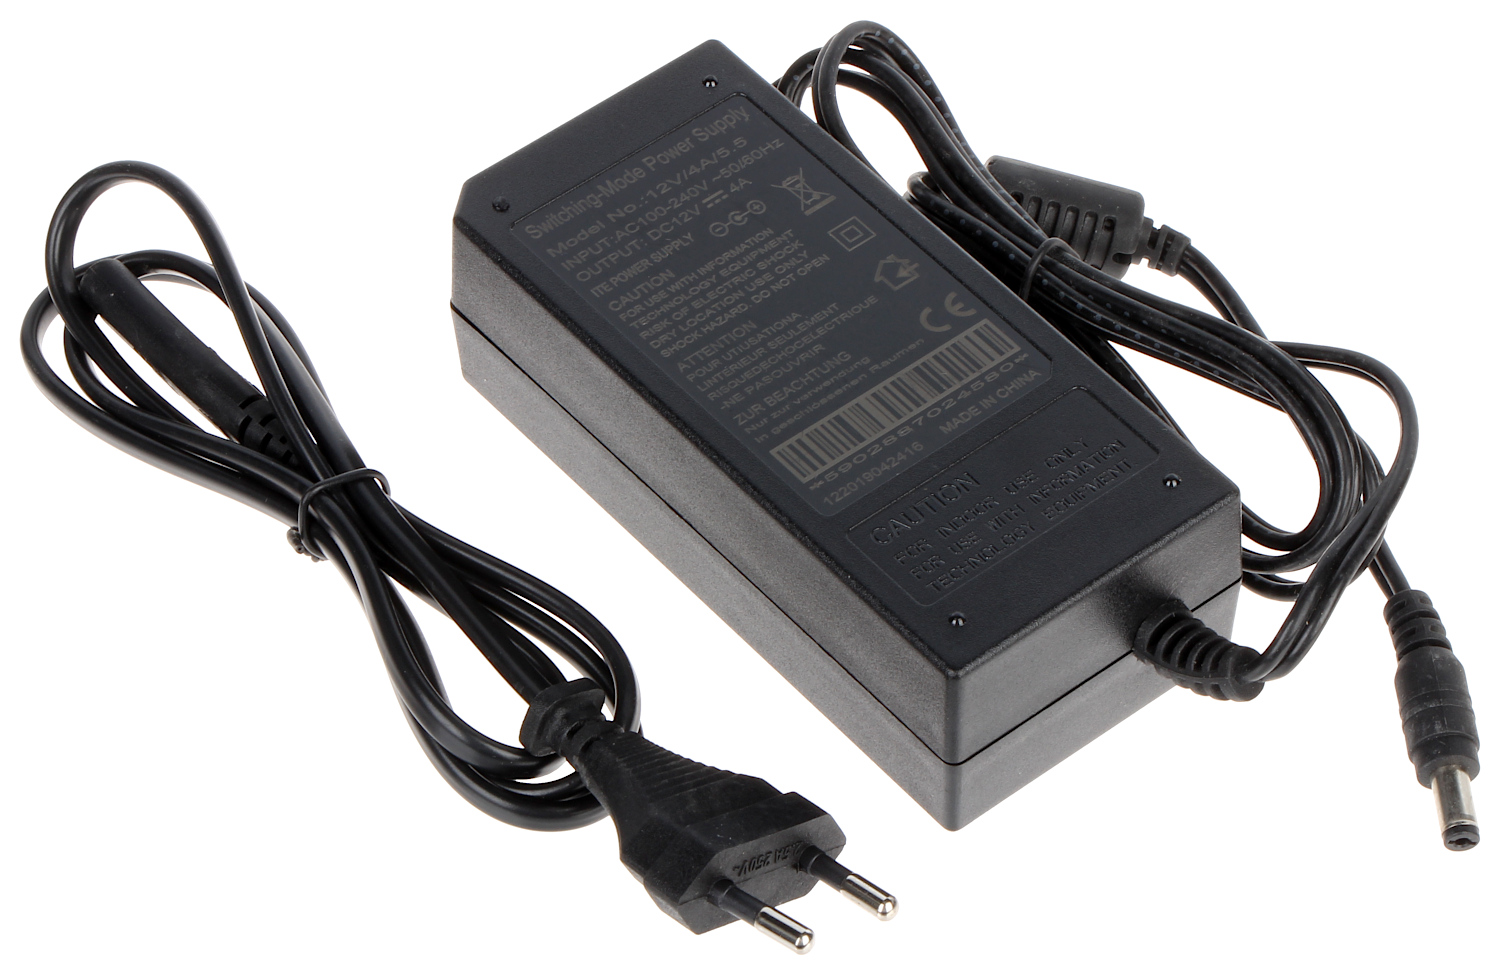 POWER SUPPLY ADAPTER 12V/1.25A/5.5 - With plug, indoor - Delta